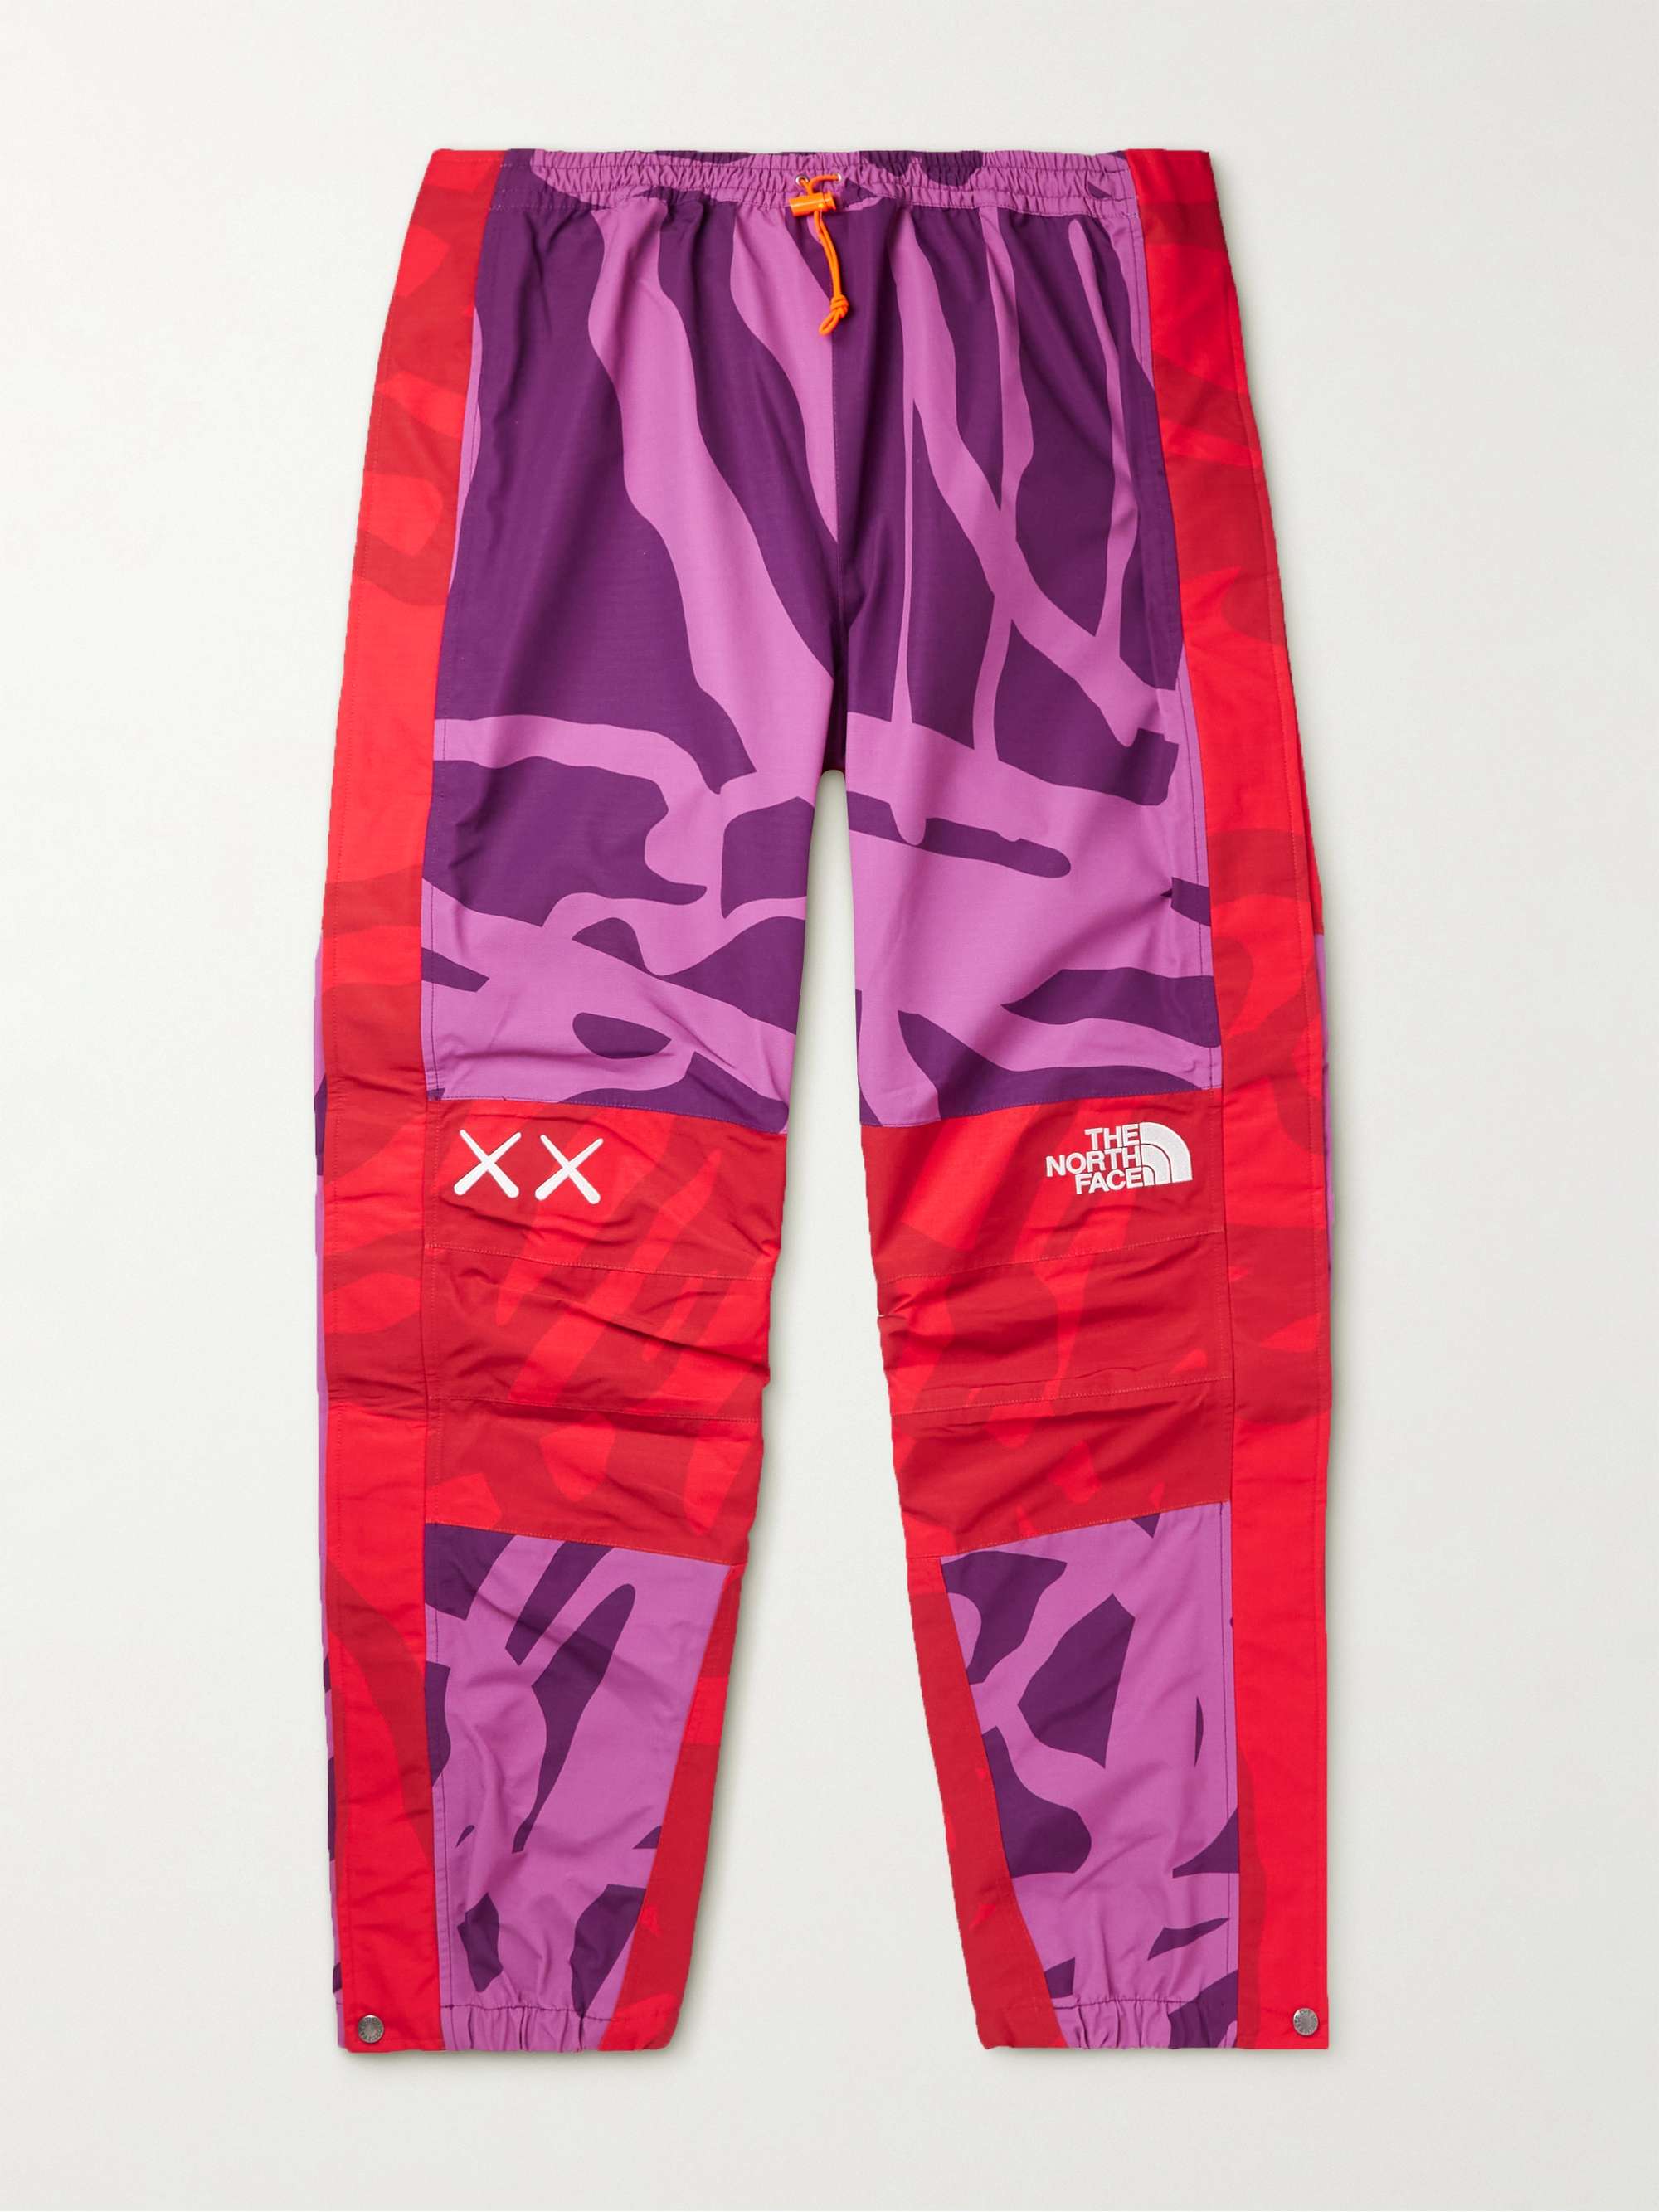 THE NORTH FACE + XX KAWS Mountain Light Tapered Printed Ripstop Drawstring Trousers